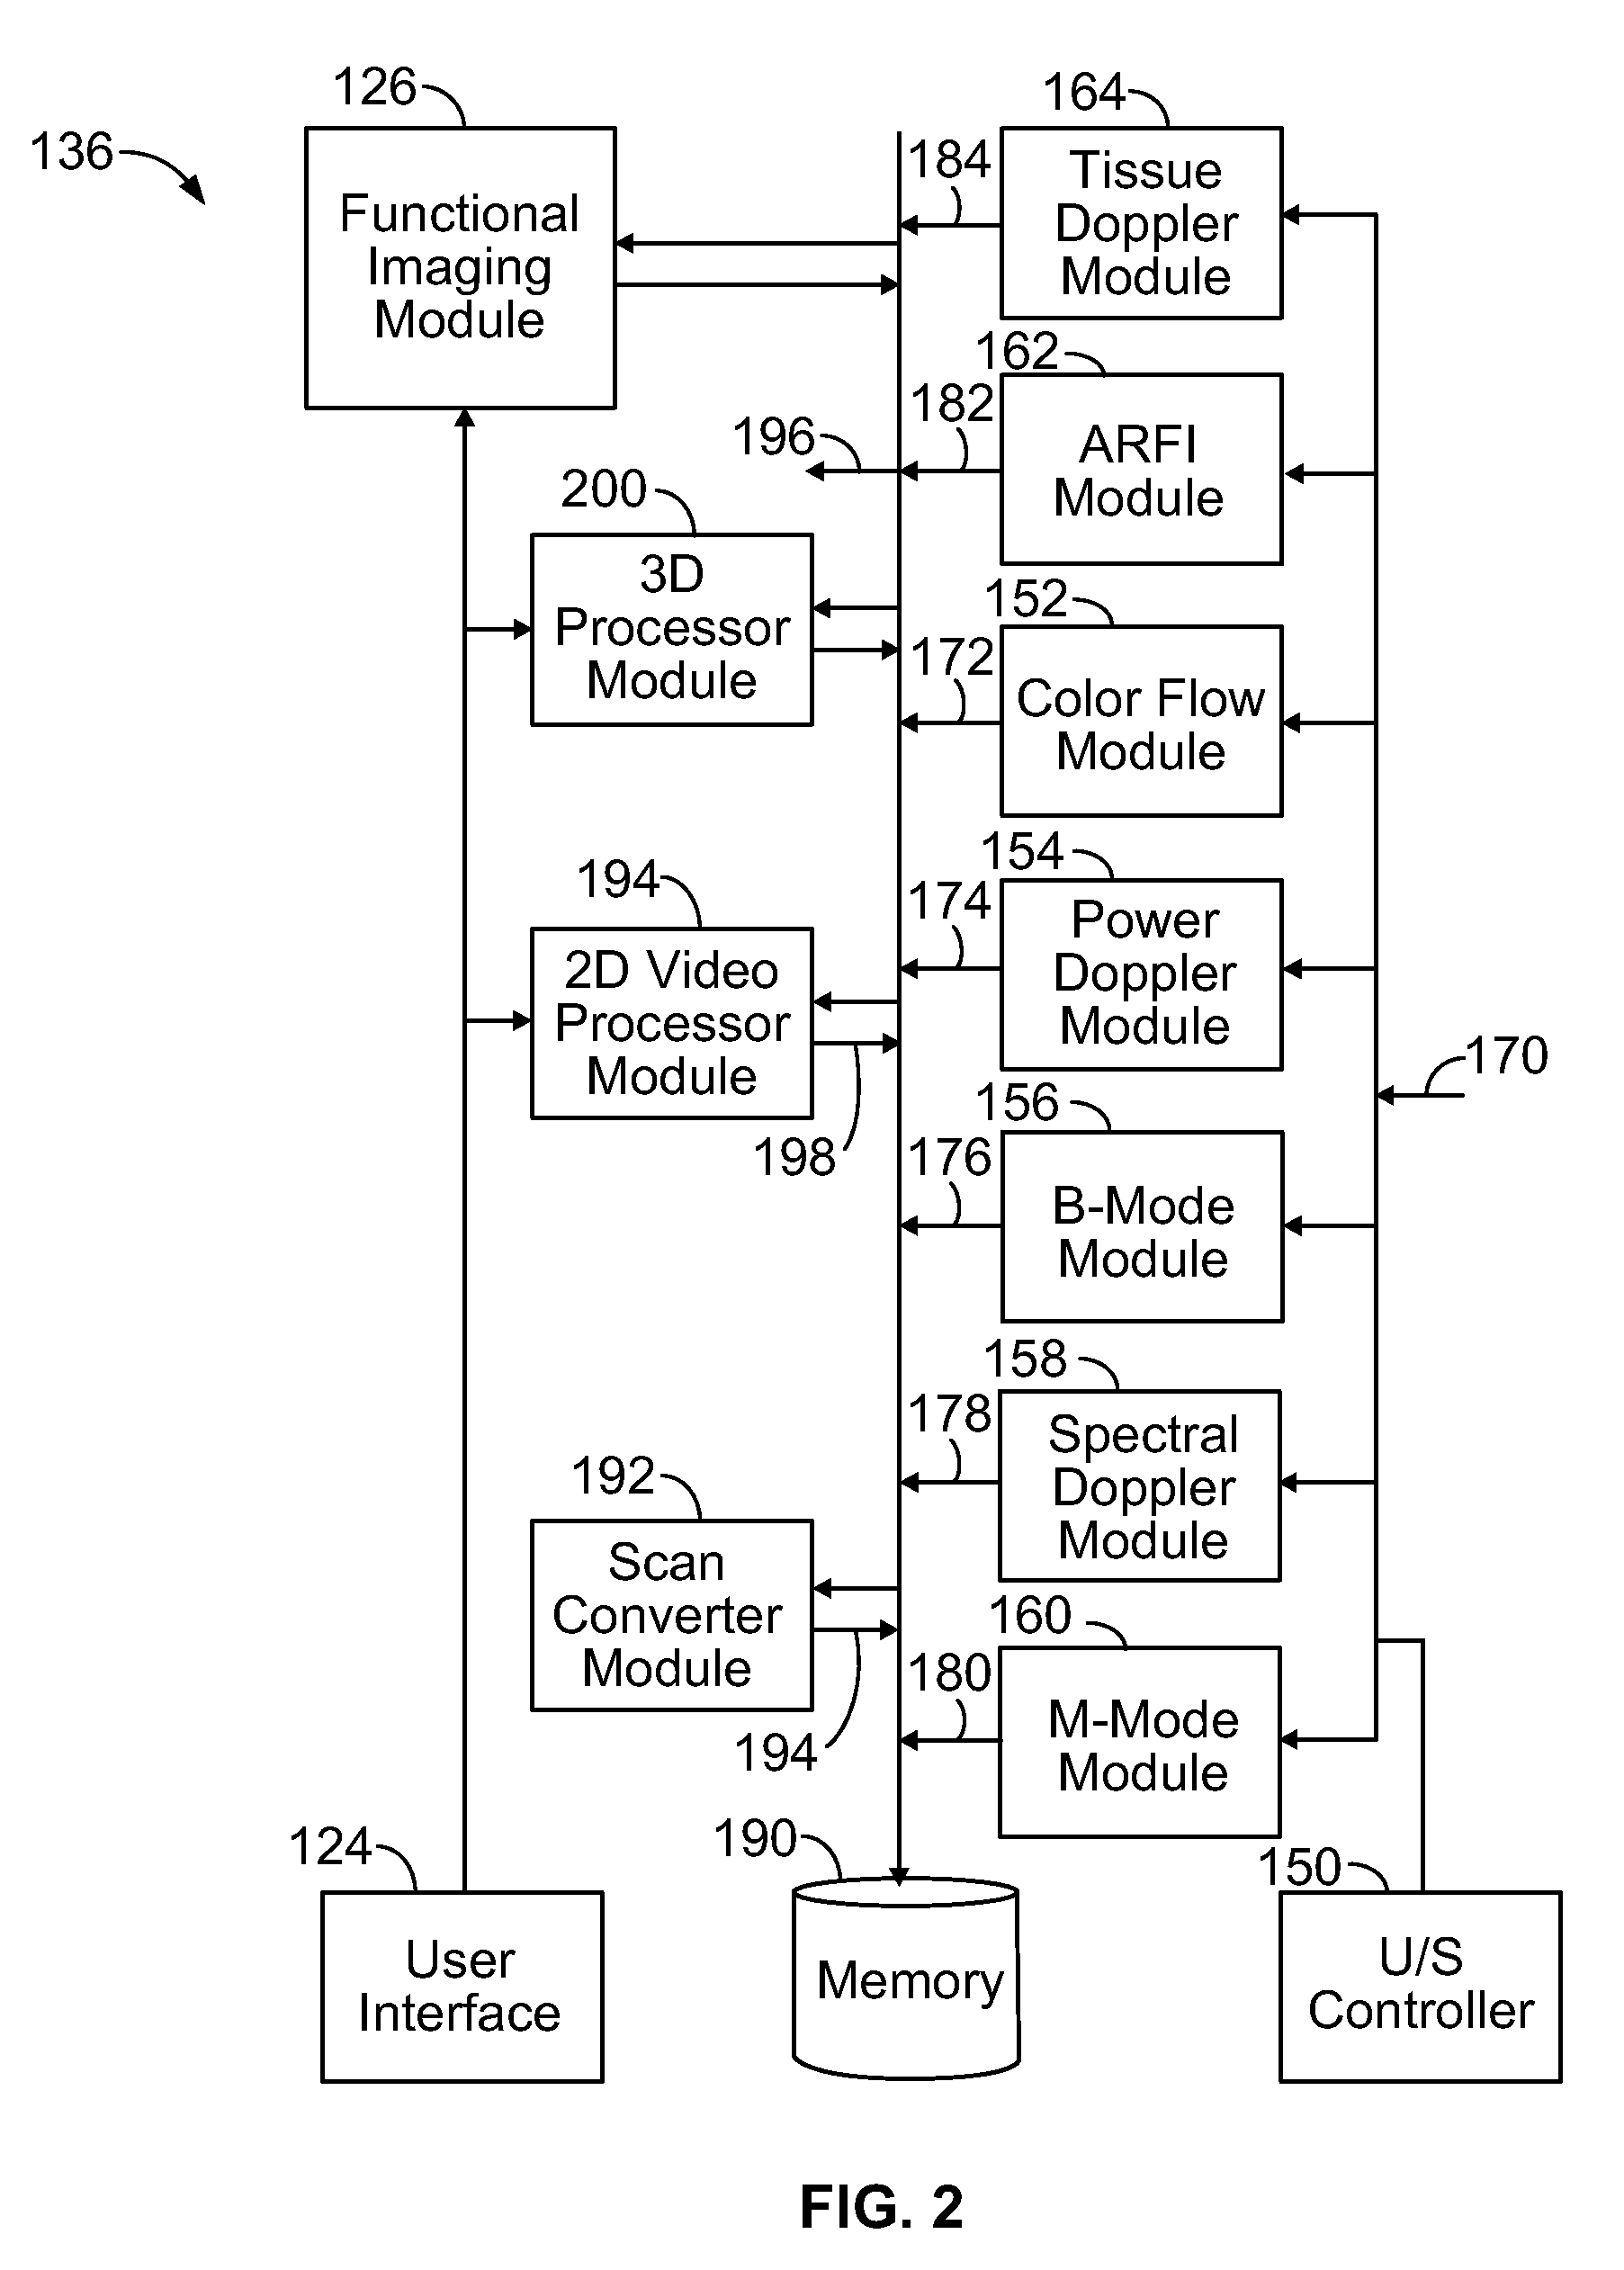 System and method for functional ultrasound imaging